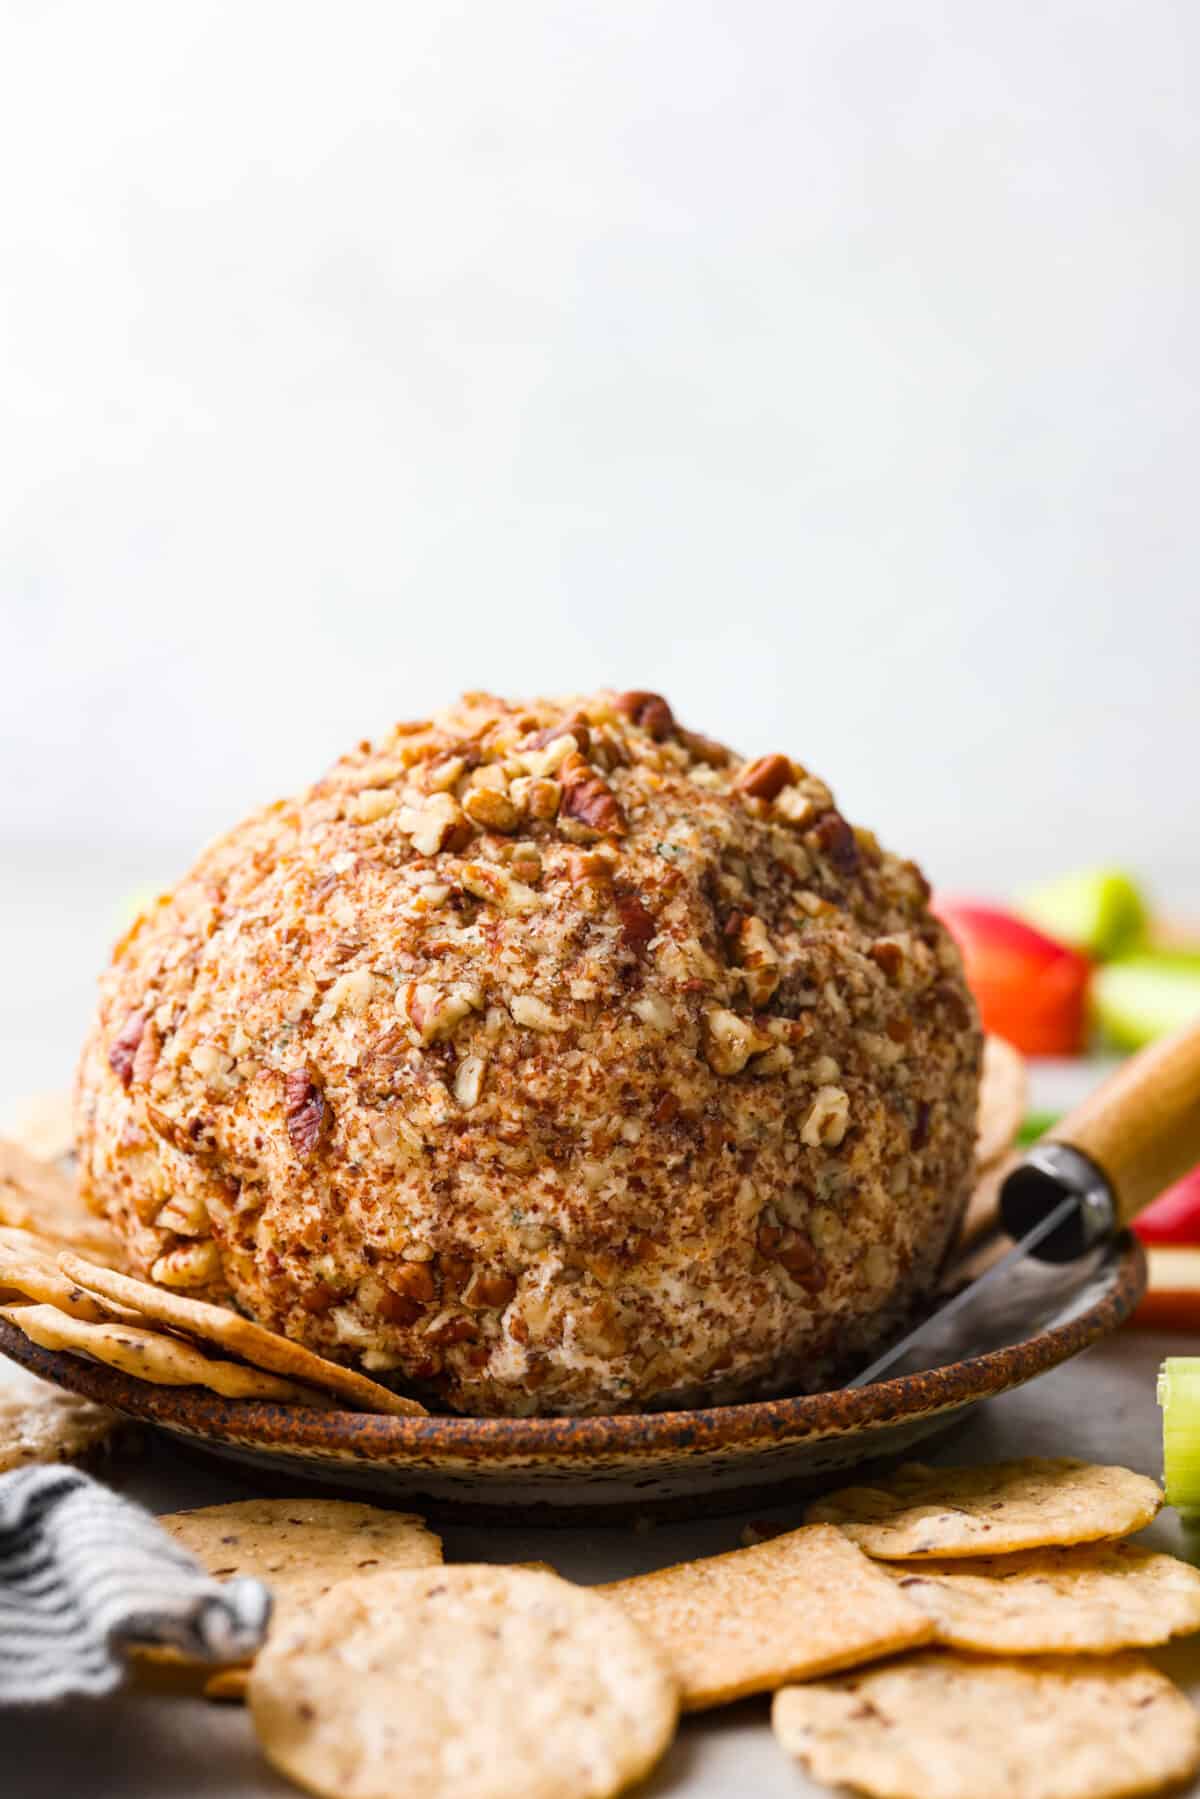 A cheese ball, coated in pecans.